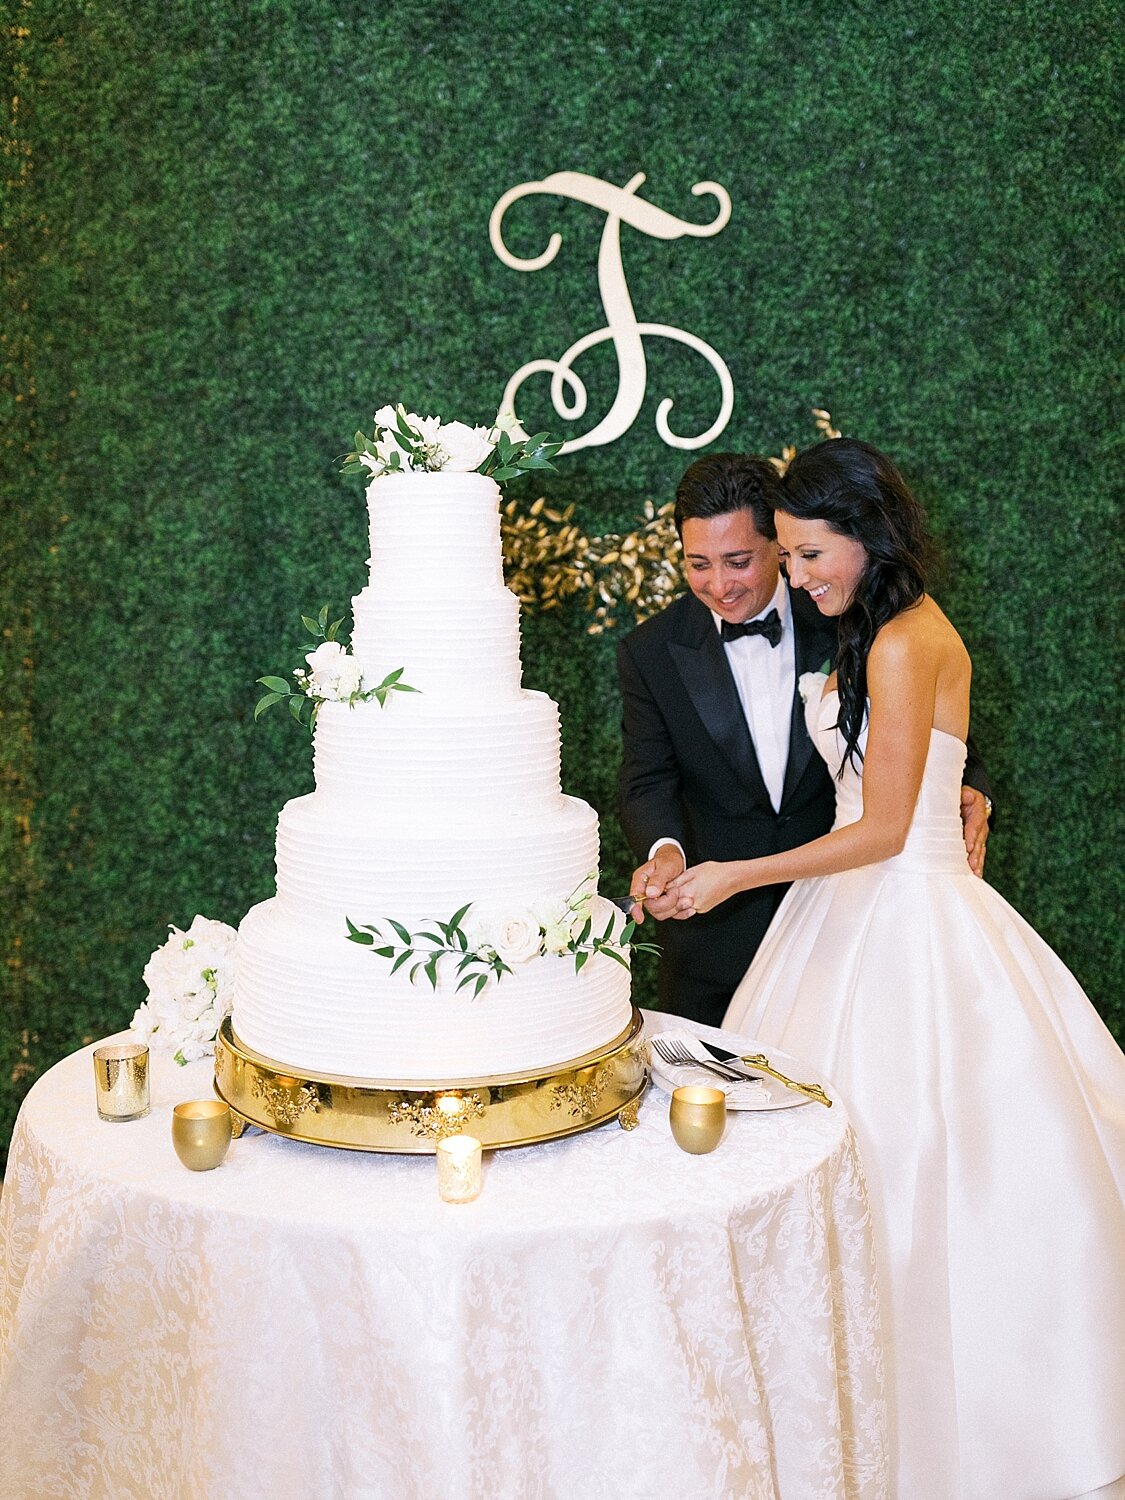 cake cutting photographed by Asher Gardner Photography